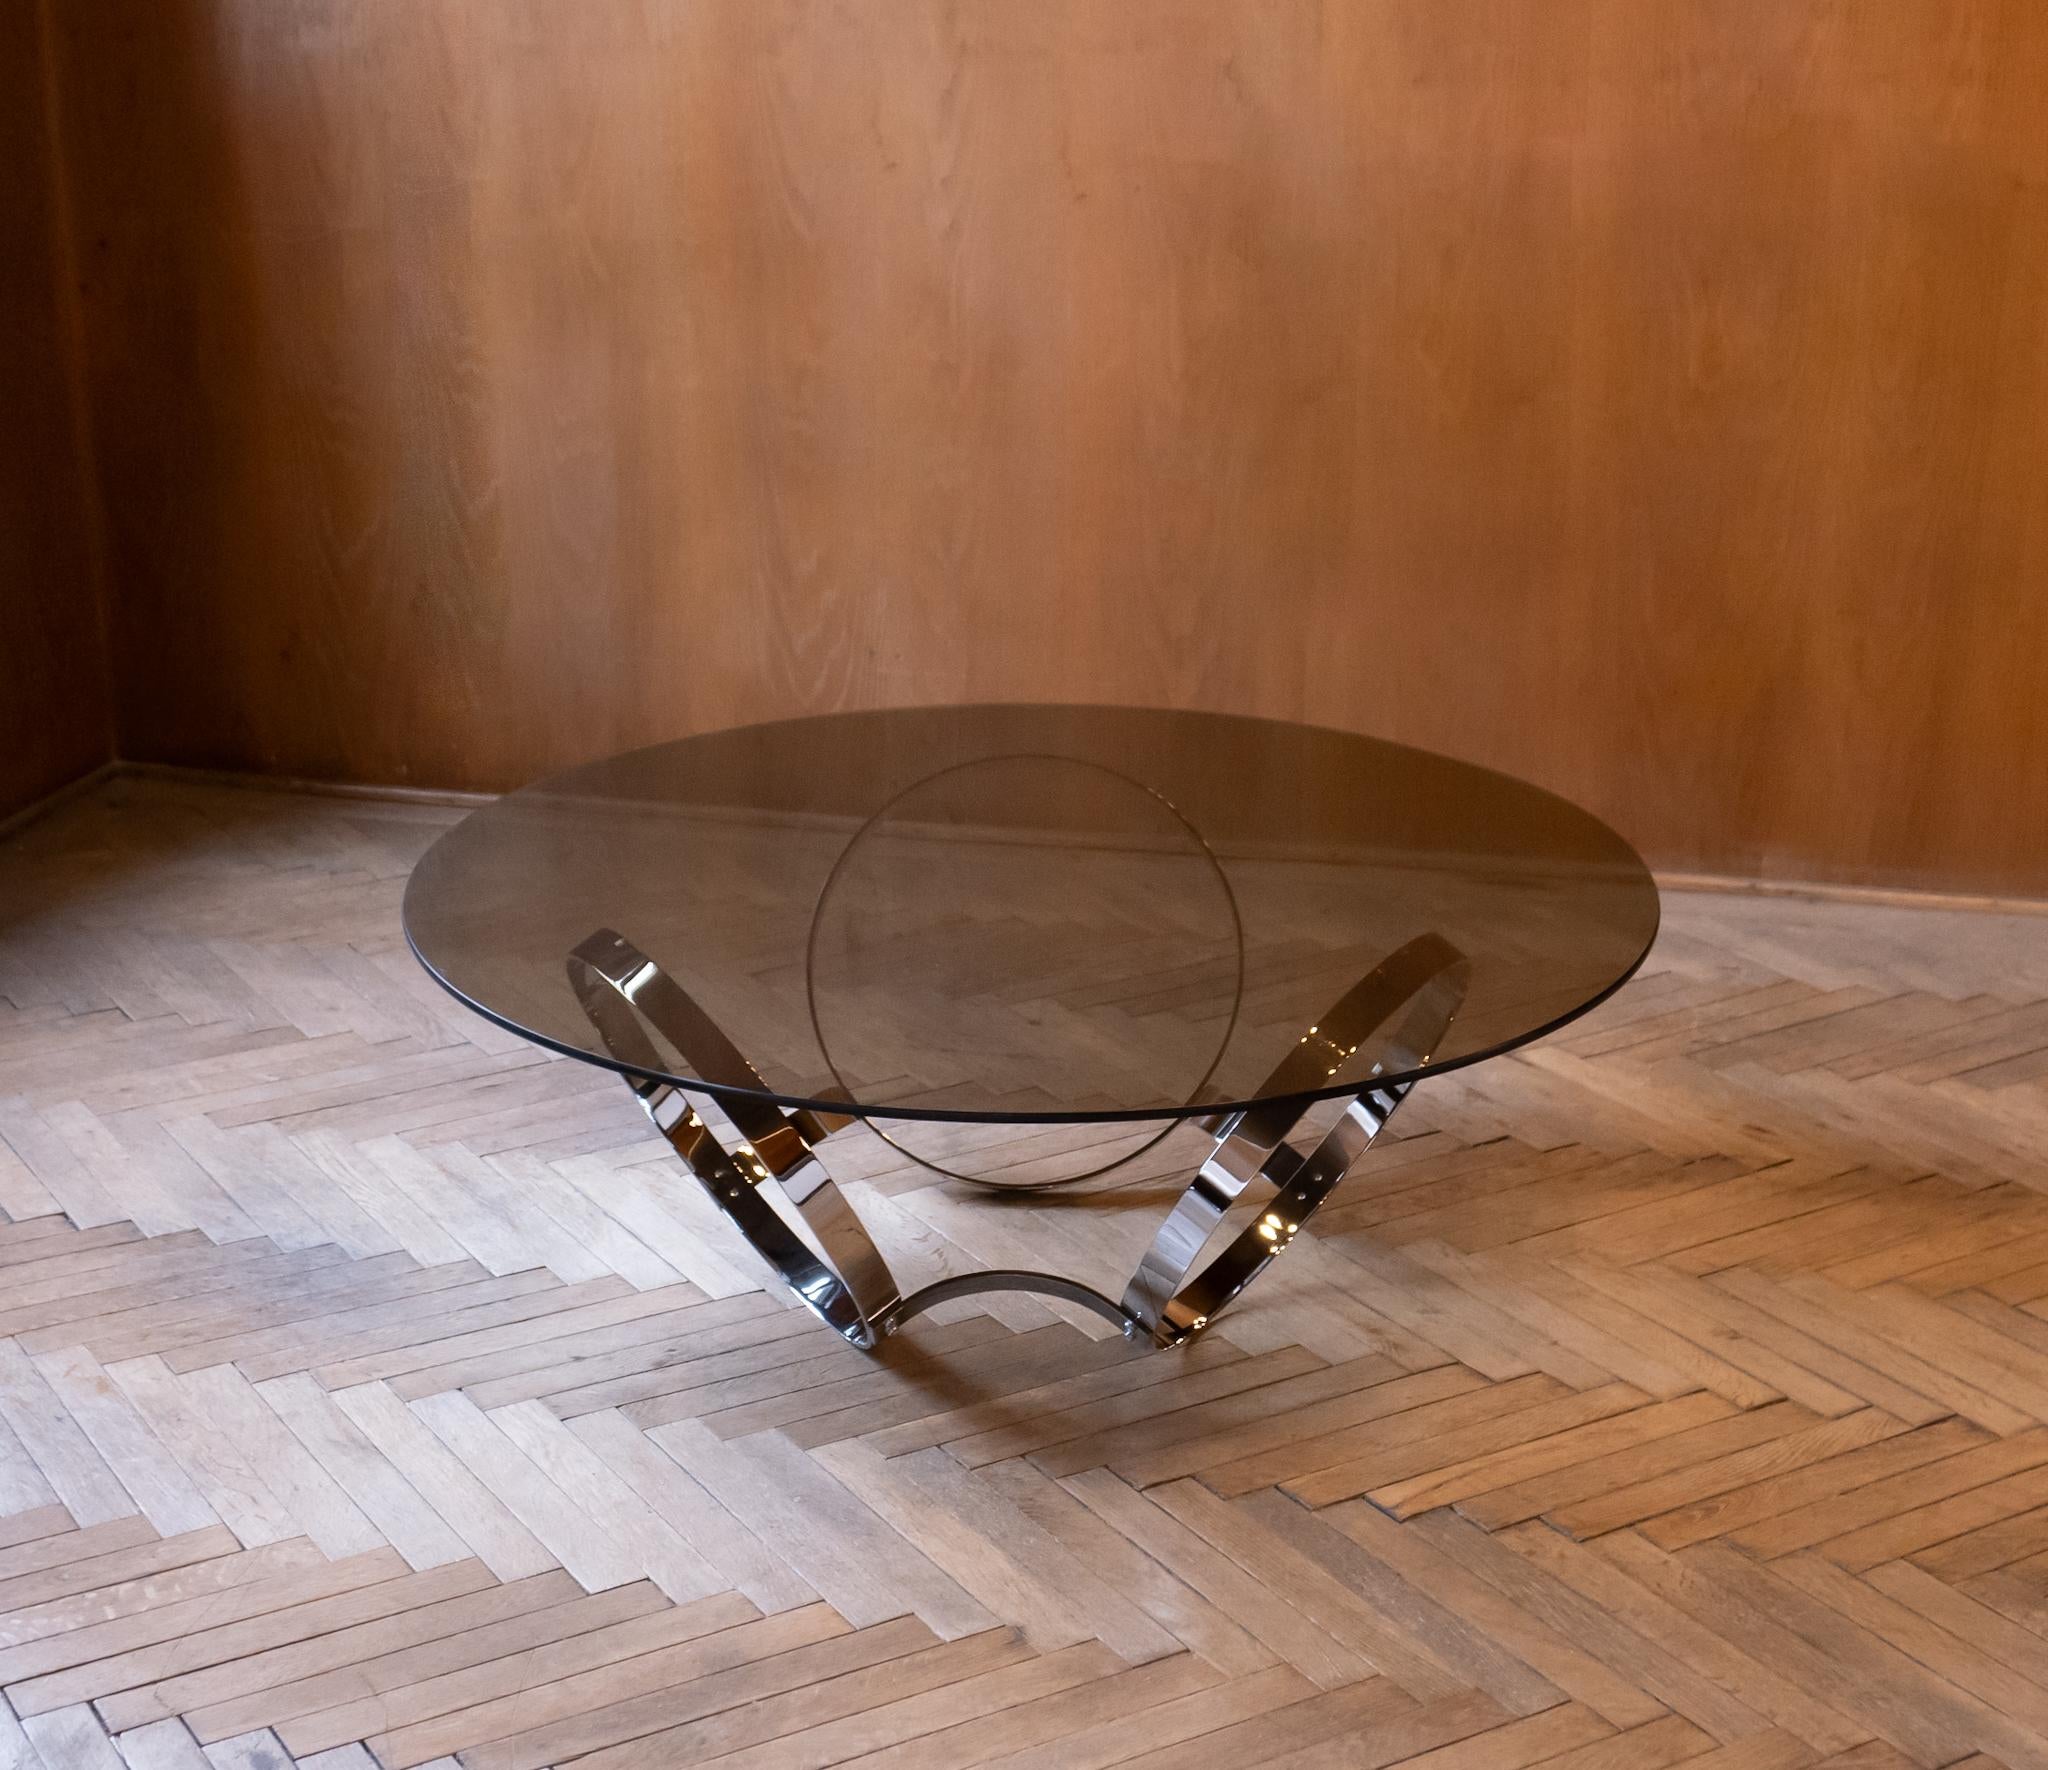 Mid-Century Modern Smoked Glass Chrome Coffee Table, Germany 1970s.

This large round coffee table with its table top made of smoked glass and its scuptural chrome base, reminiscent of the iconic designs by renowned creator Ronald Schmitt,